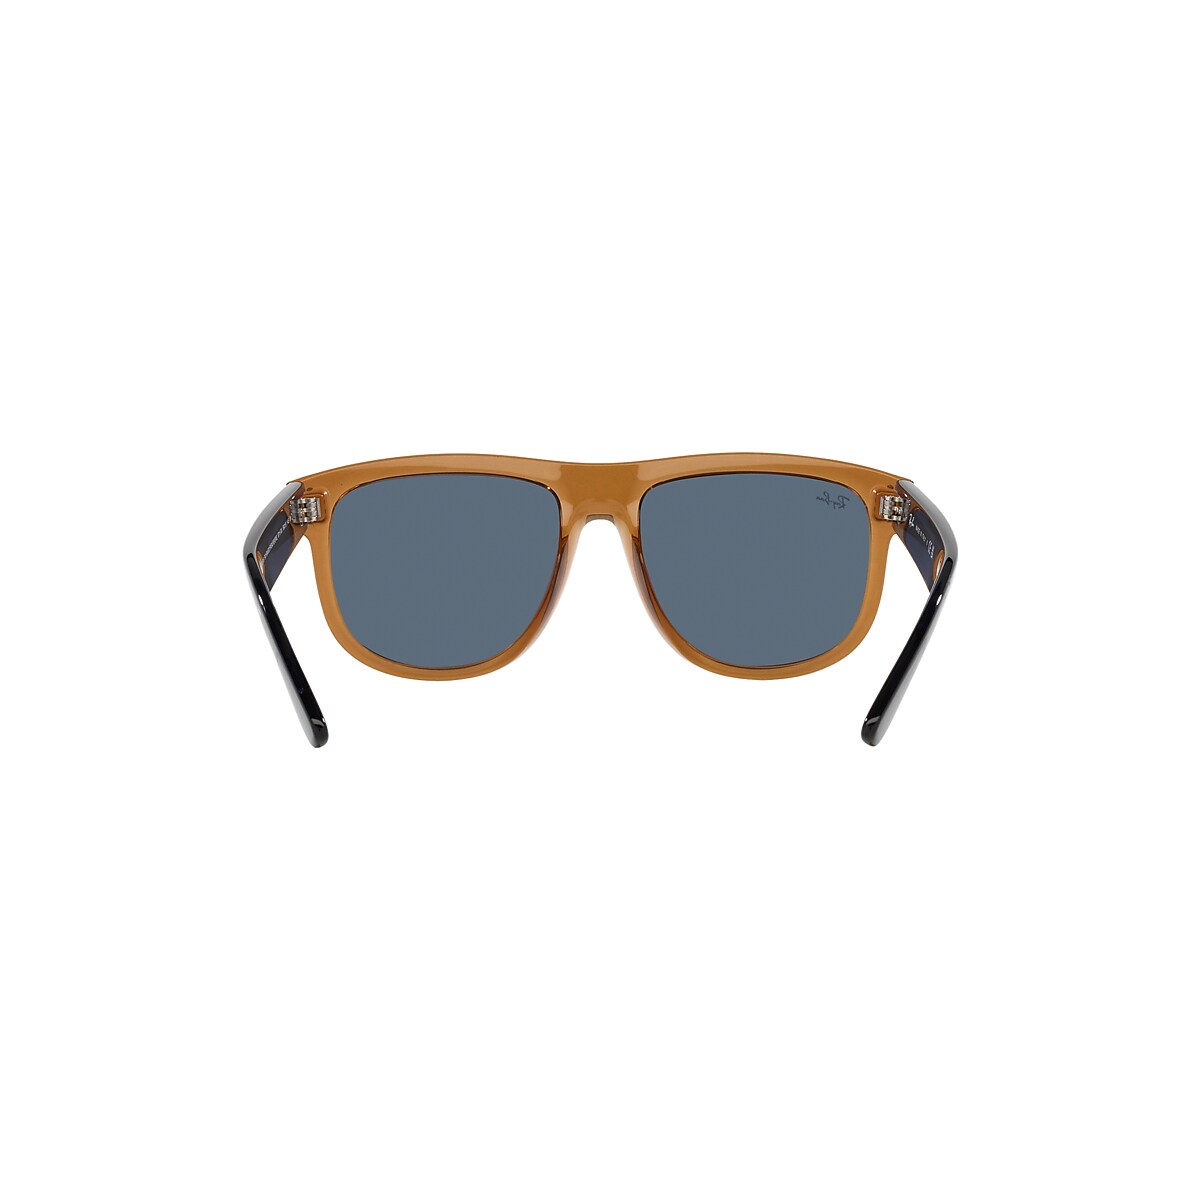 BOYFRIEND REVERSE Sunglasses in Transparent Camel Brown and Grey 